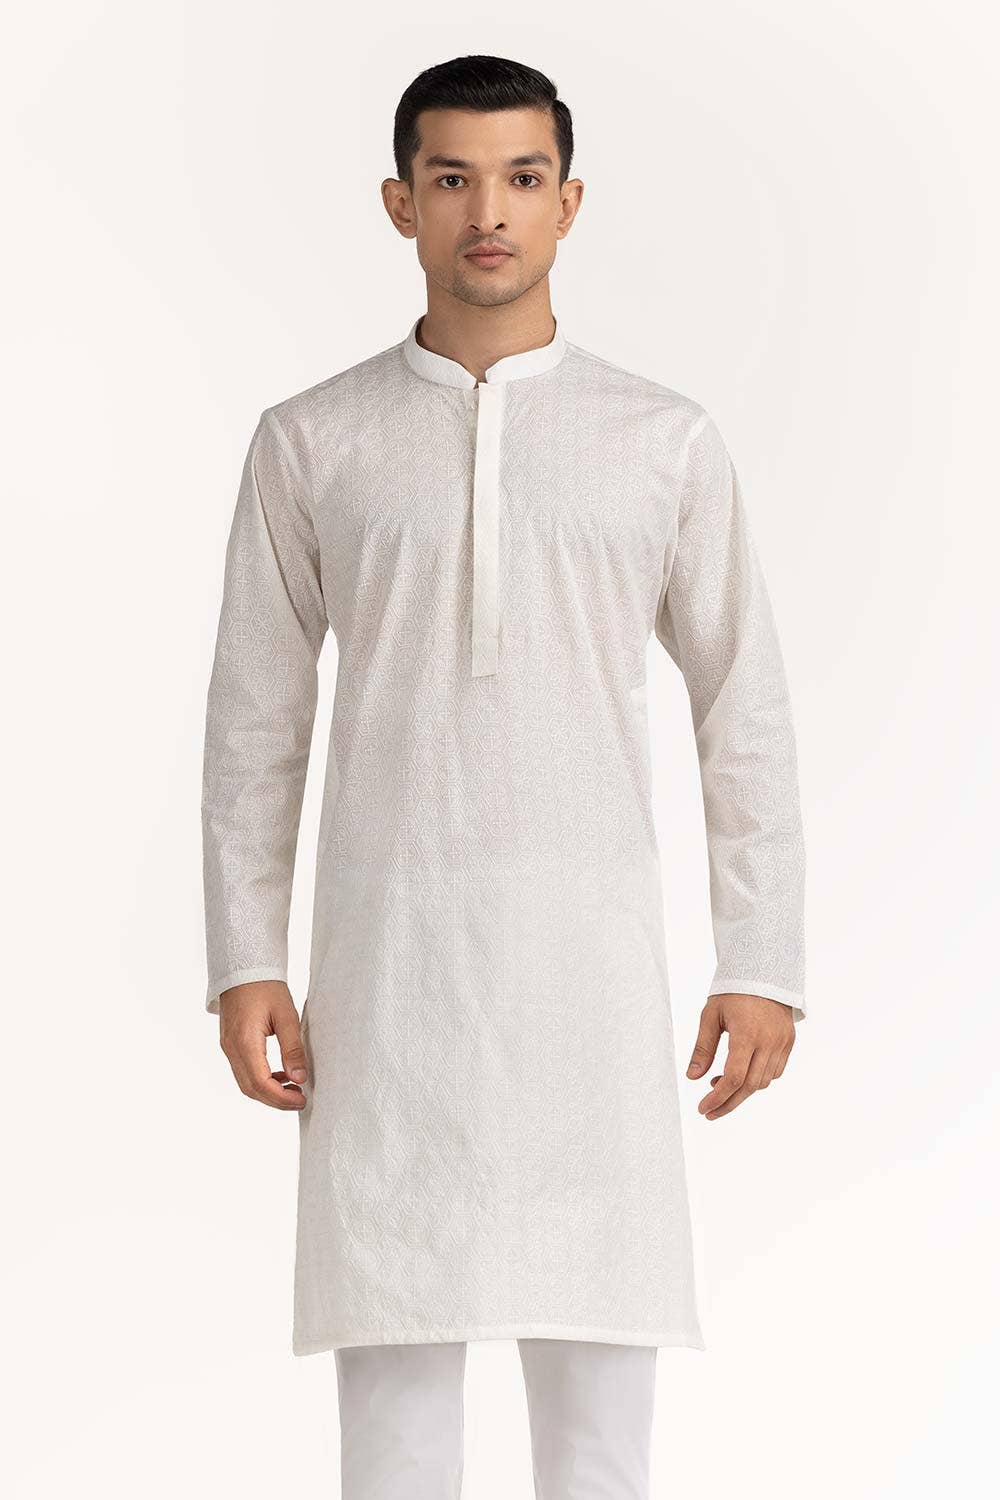 Gul Ahmed Ready to Wear Men's White Embroidered Kurta KR-EMB23-019